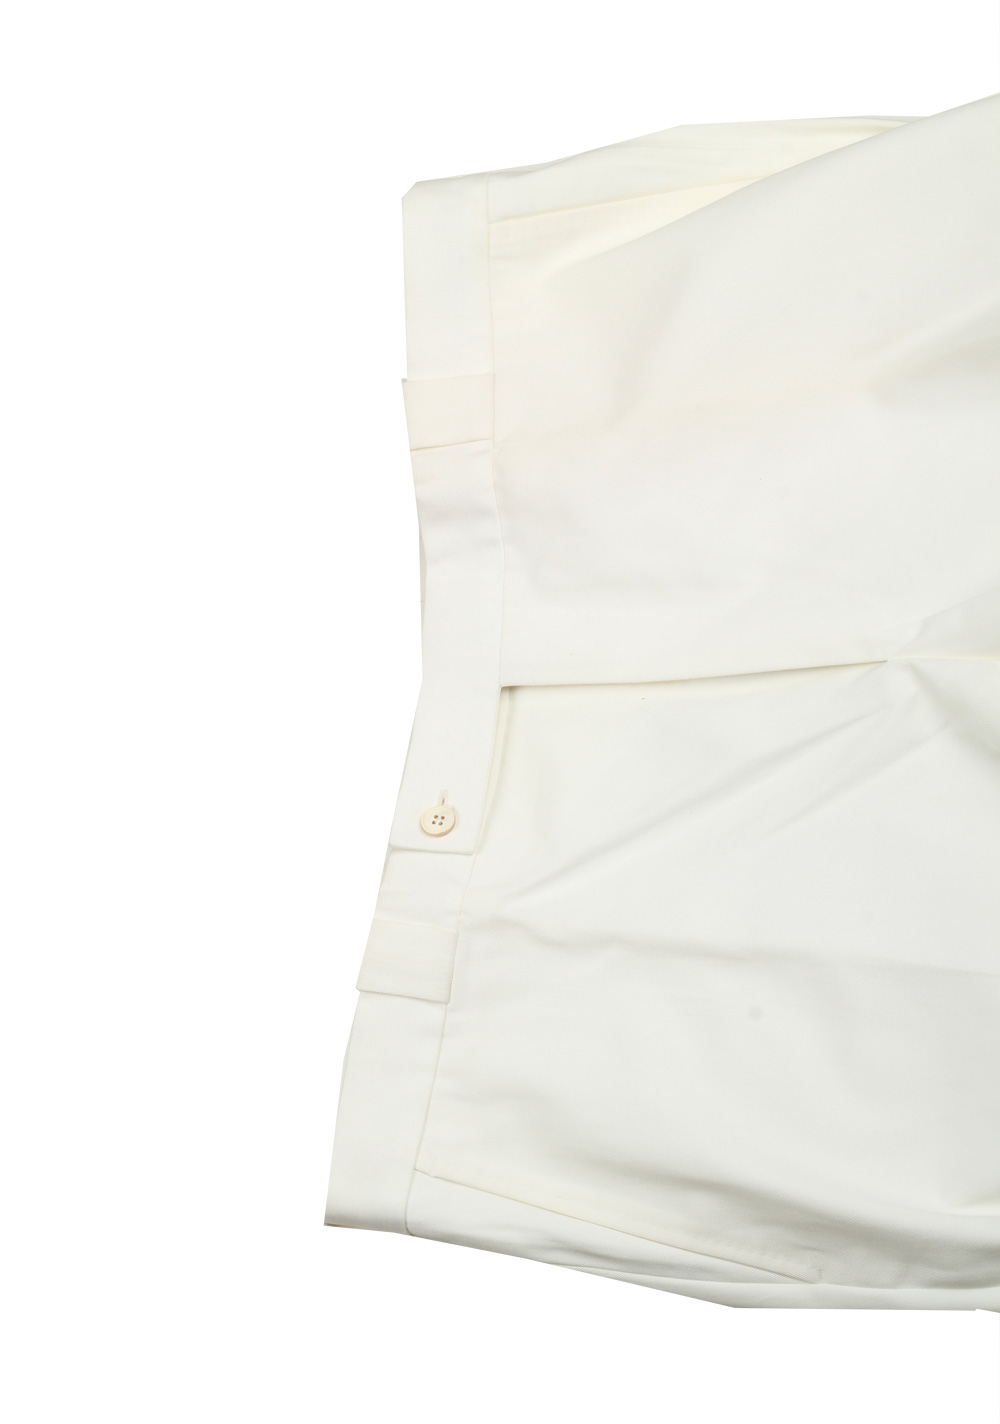 TOM FORD White Cotton Trousers Size 56 / 40 U.S. | Costume Limité